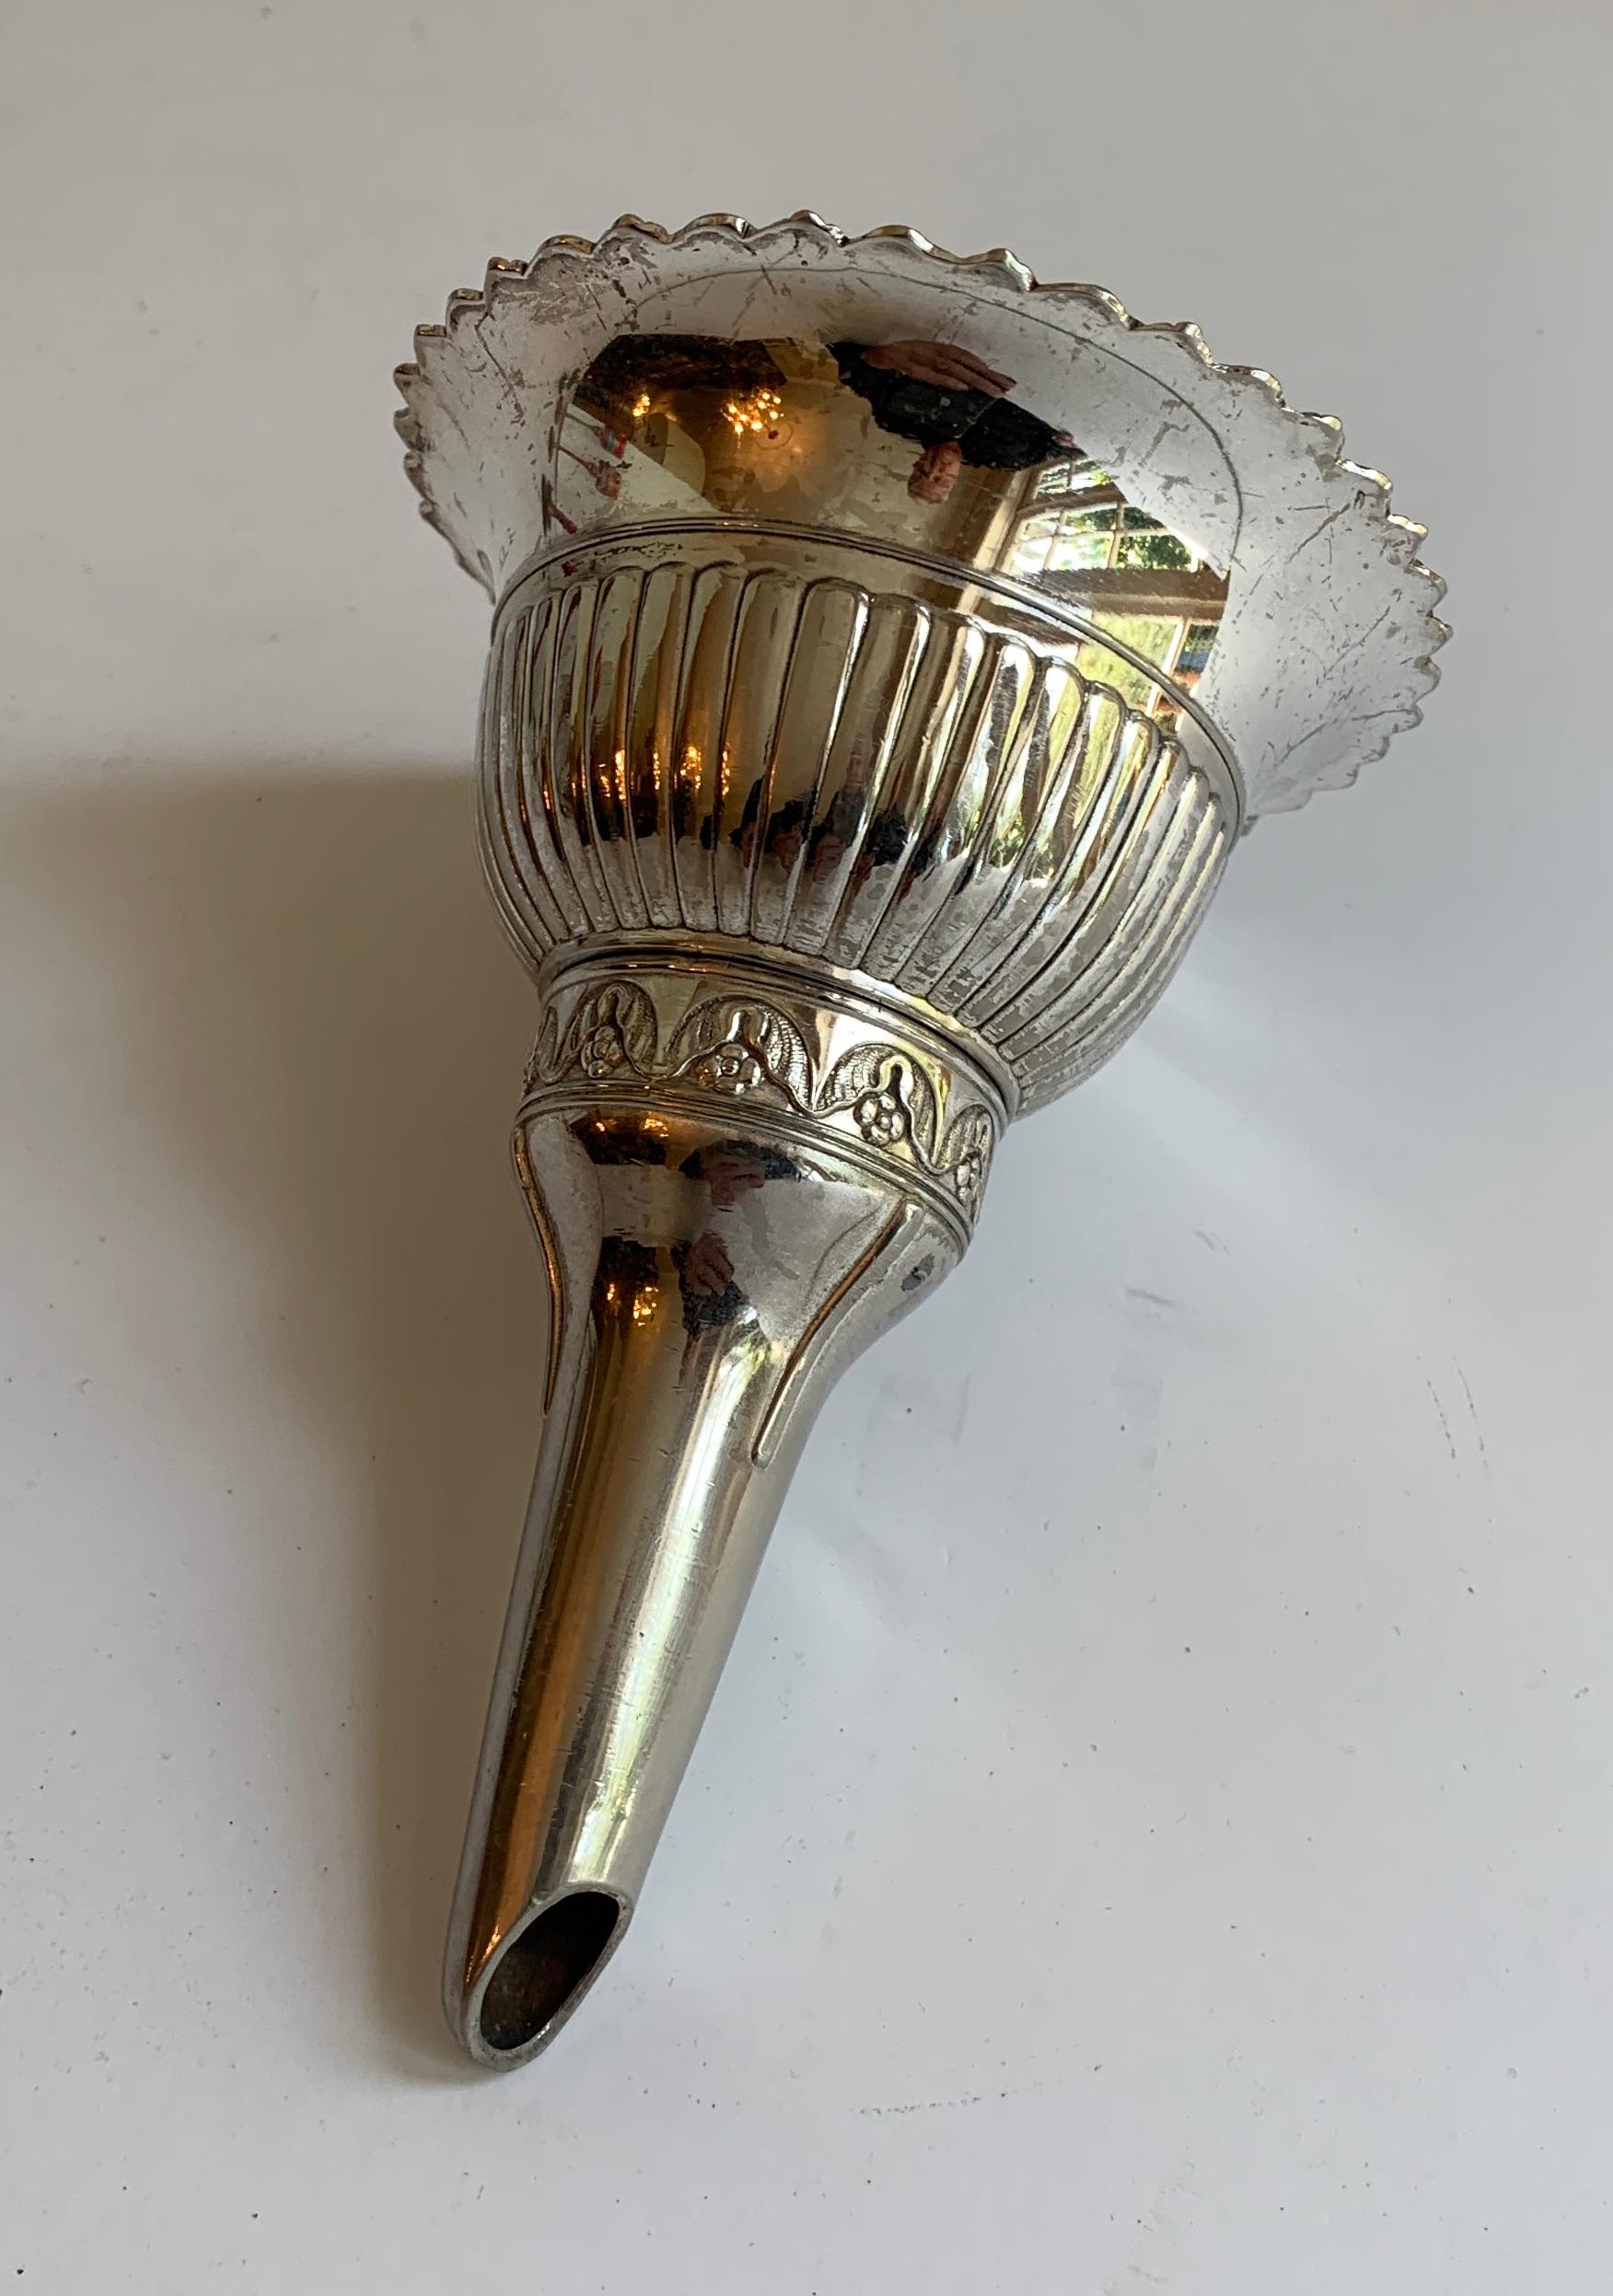 A practical decorative addition, with Tudor rose pattern, for the bar, the wine bar funnel has a strainer, allowing you to filter out sediment. Unscrewing the two-part piece also allows for easy cleaning.